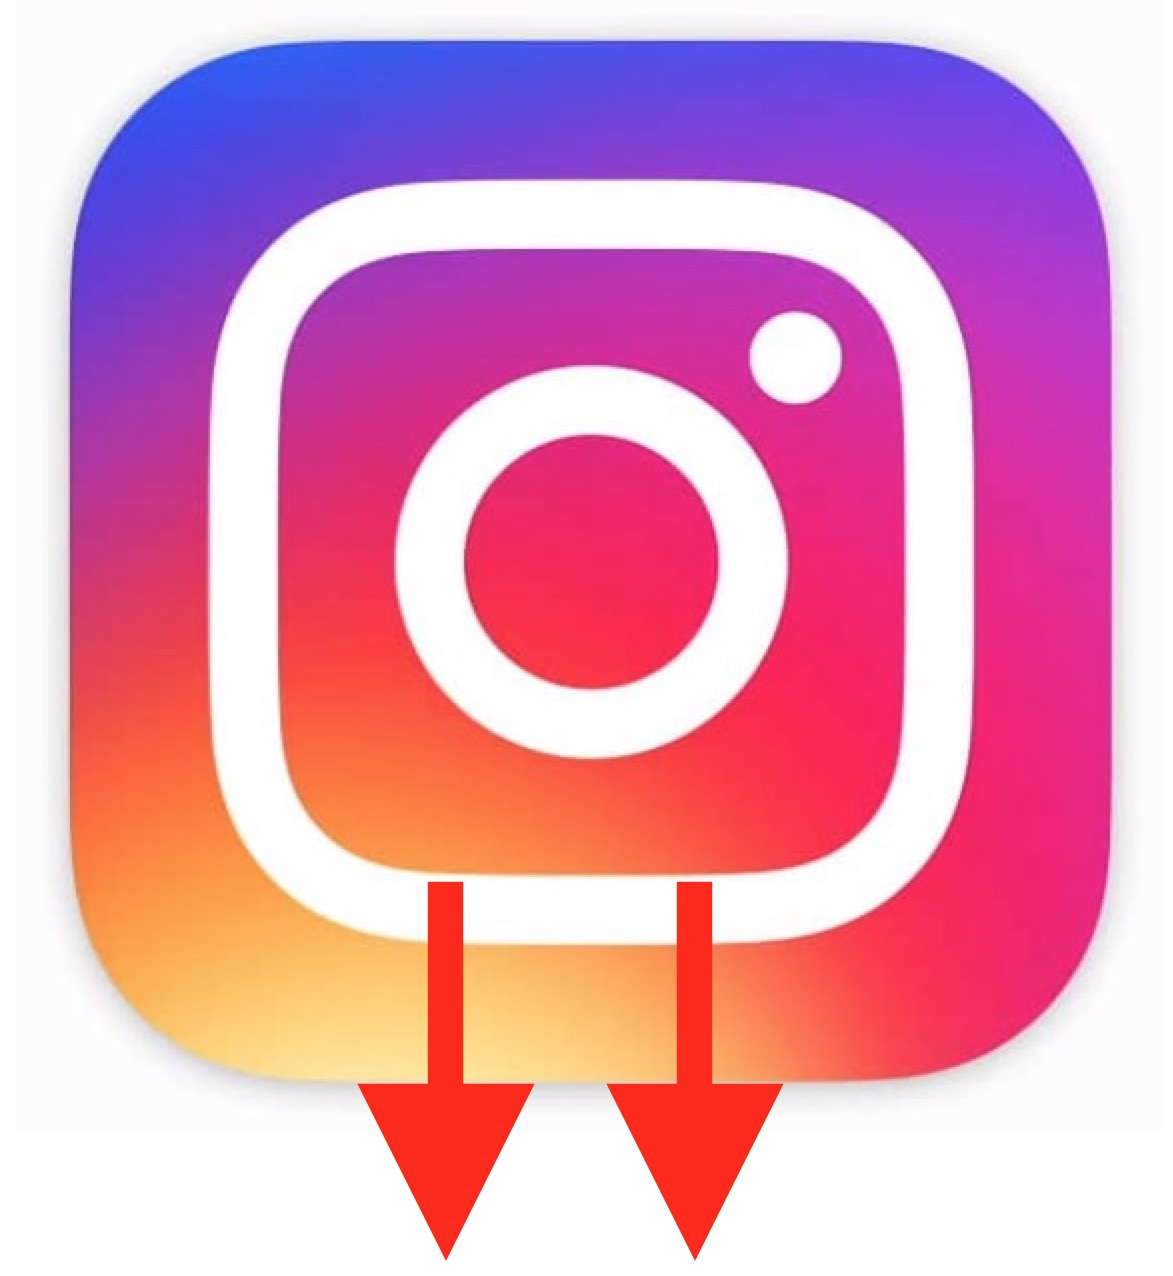 How to Download All Photos & Video from Your Instagram Account